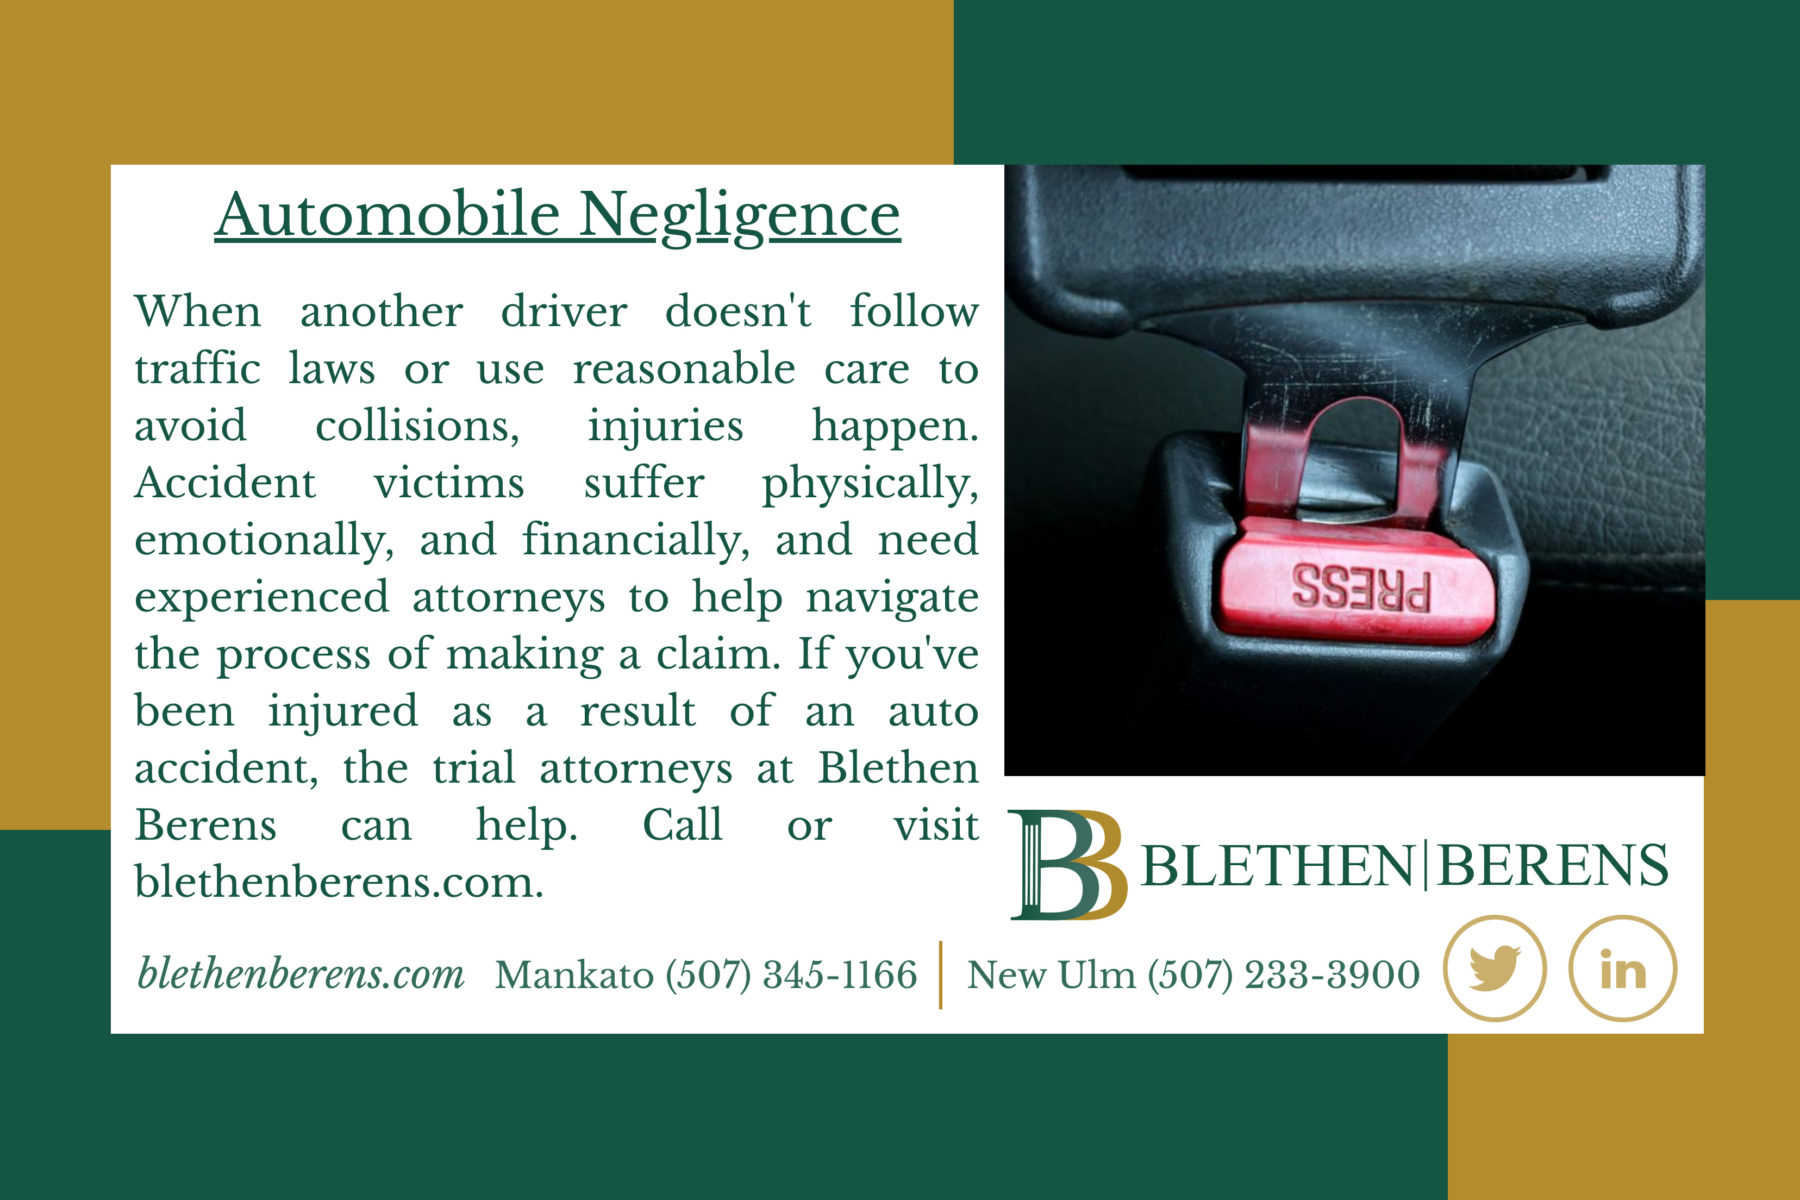 Auto negligence services of Blethen Berens overview and picture of seatbelt.